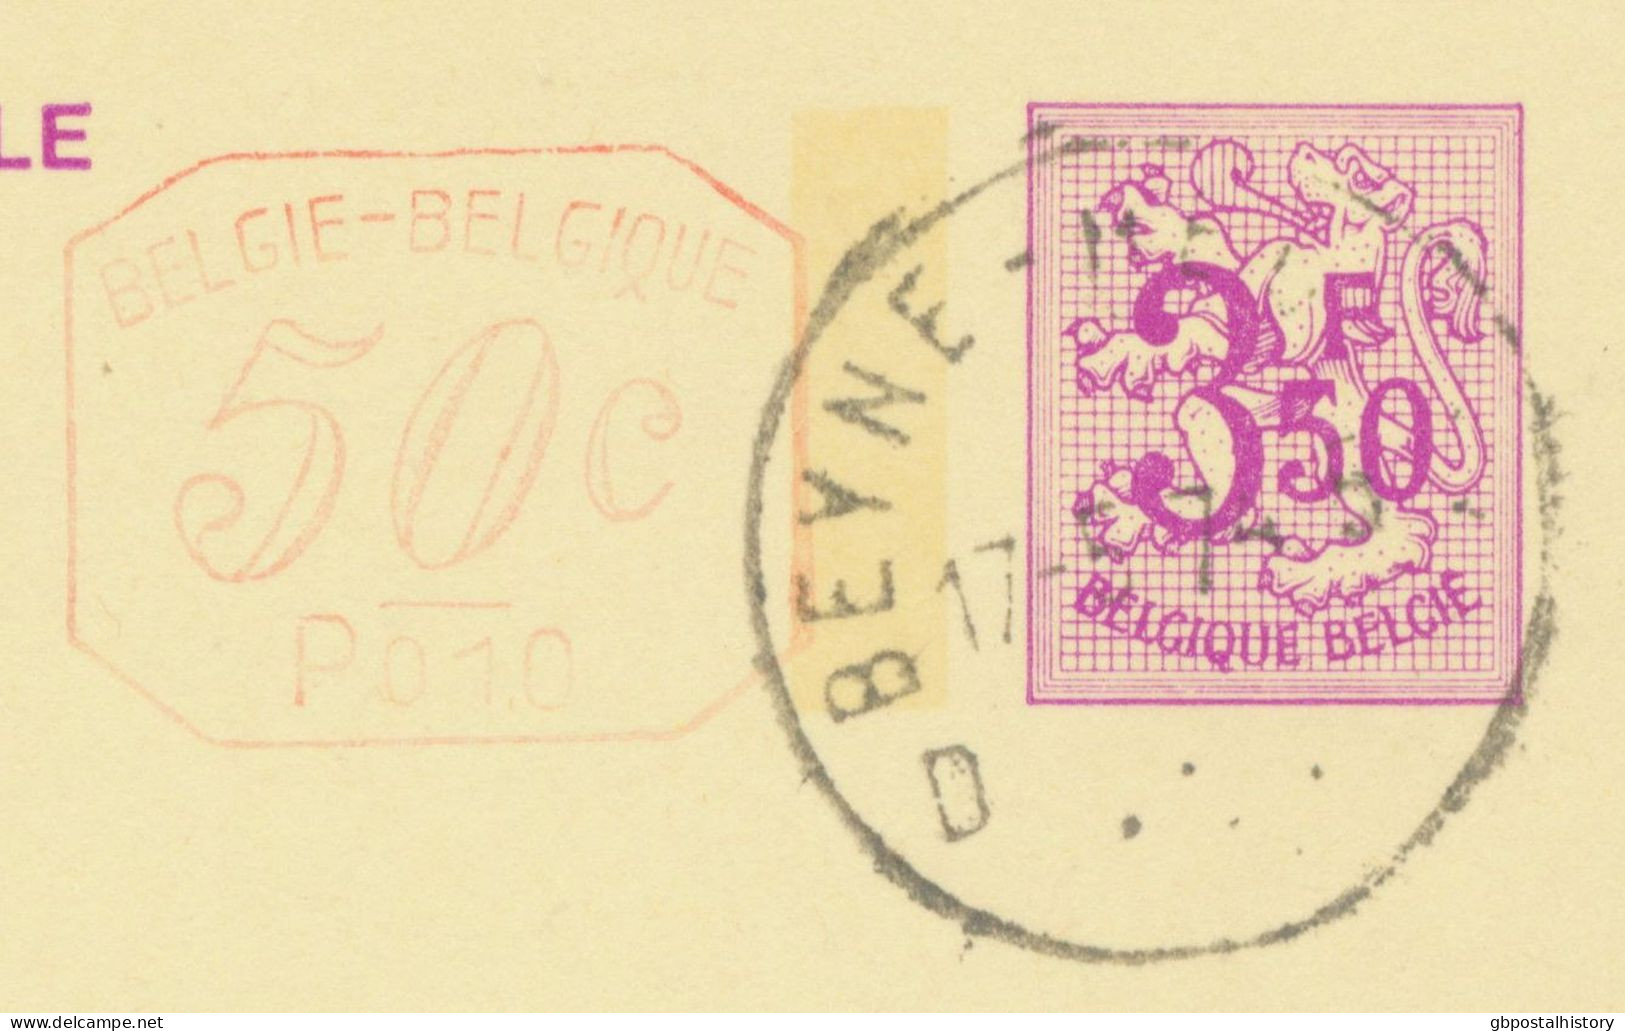 BELGIUM VILLAGE POSTMARKS  BEYNE-HEUSAY D SC With Dots 1974 (Postal Stationery 3,50 + 0,50 F, PUBLIBEL 2577 F) To Luxemb - Oblitérations à Points